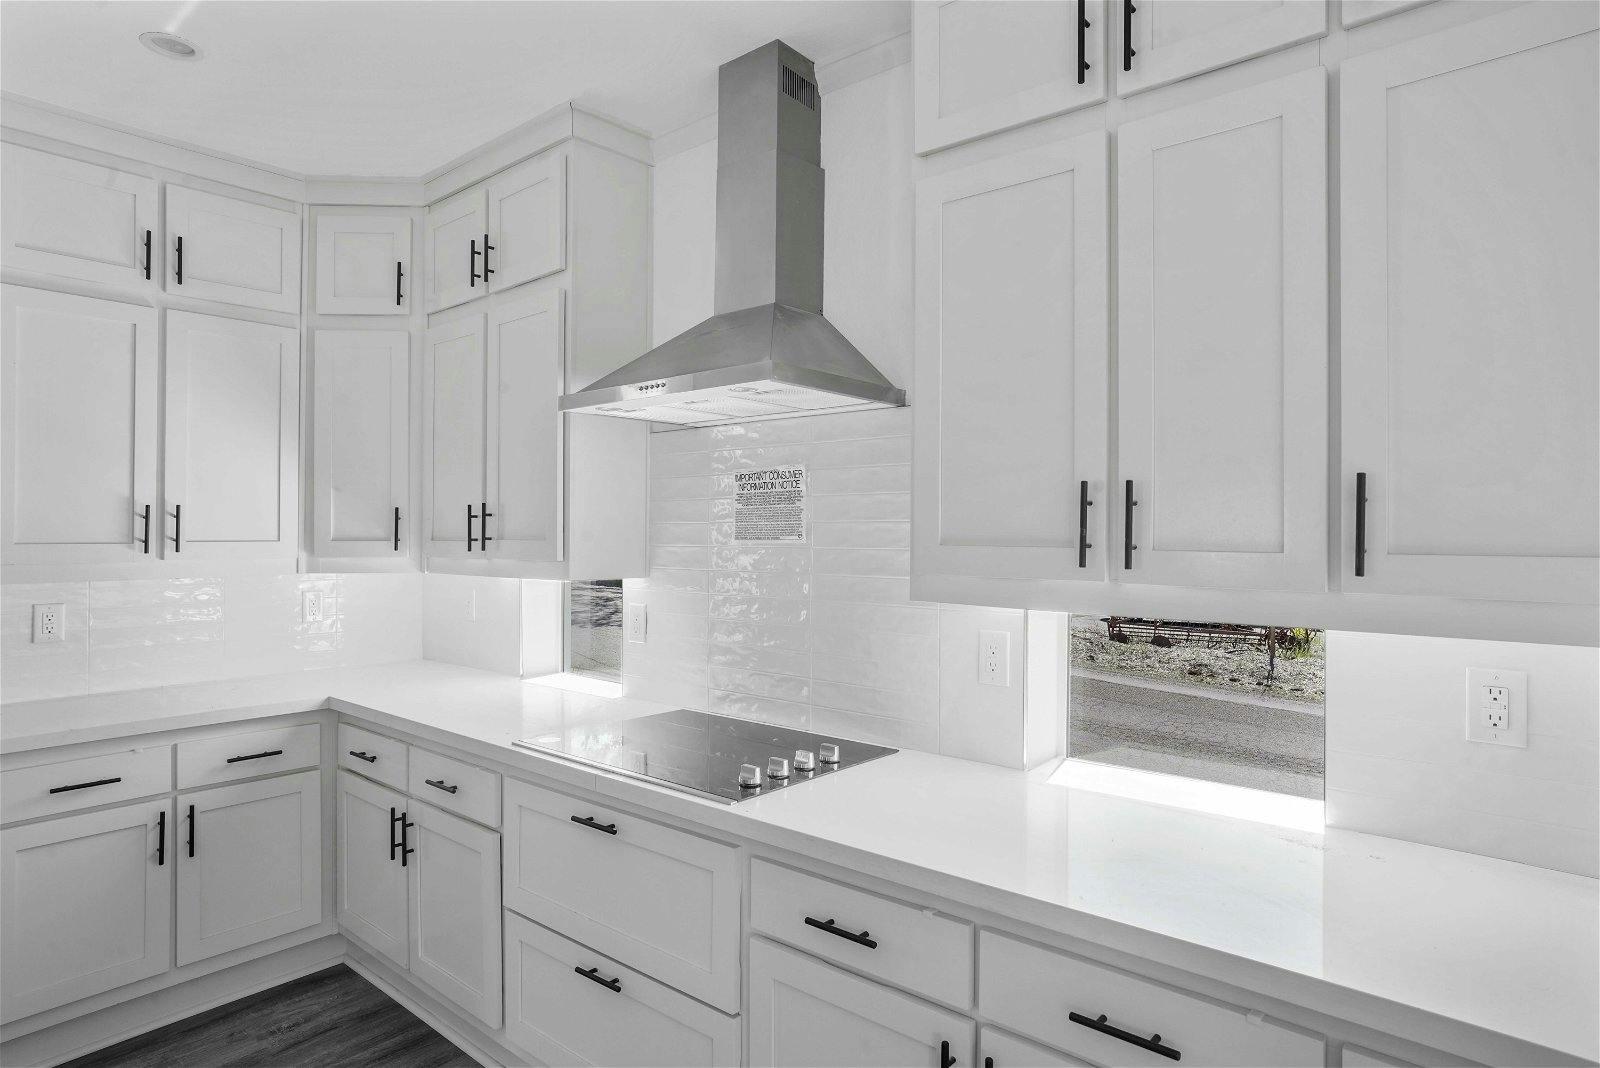 Carrington kitchen and interior home features